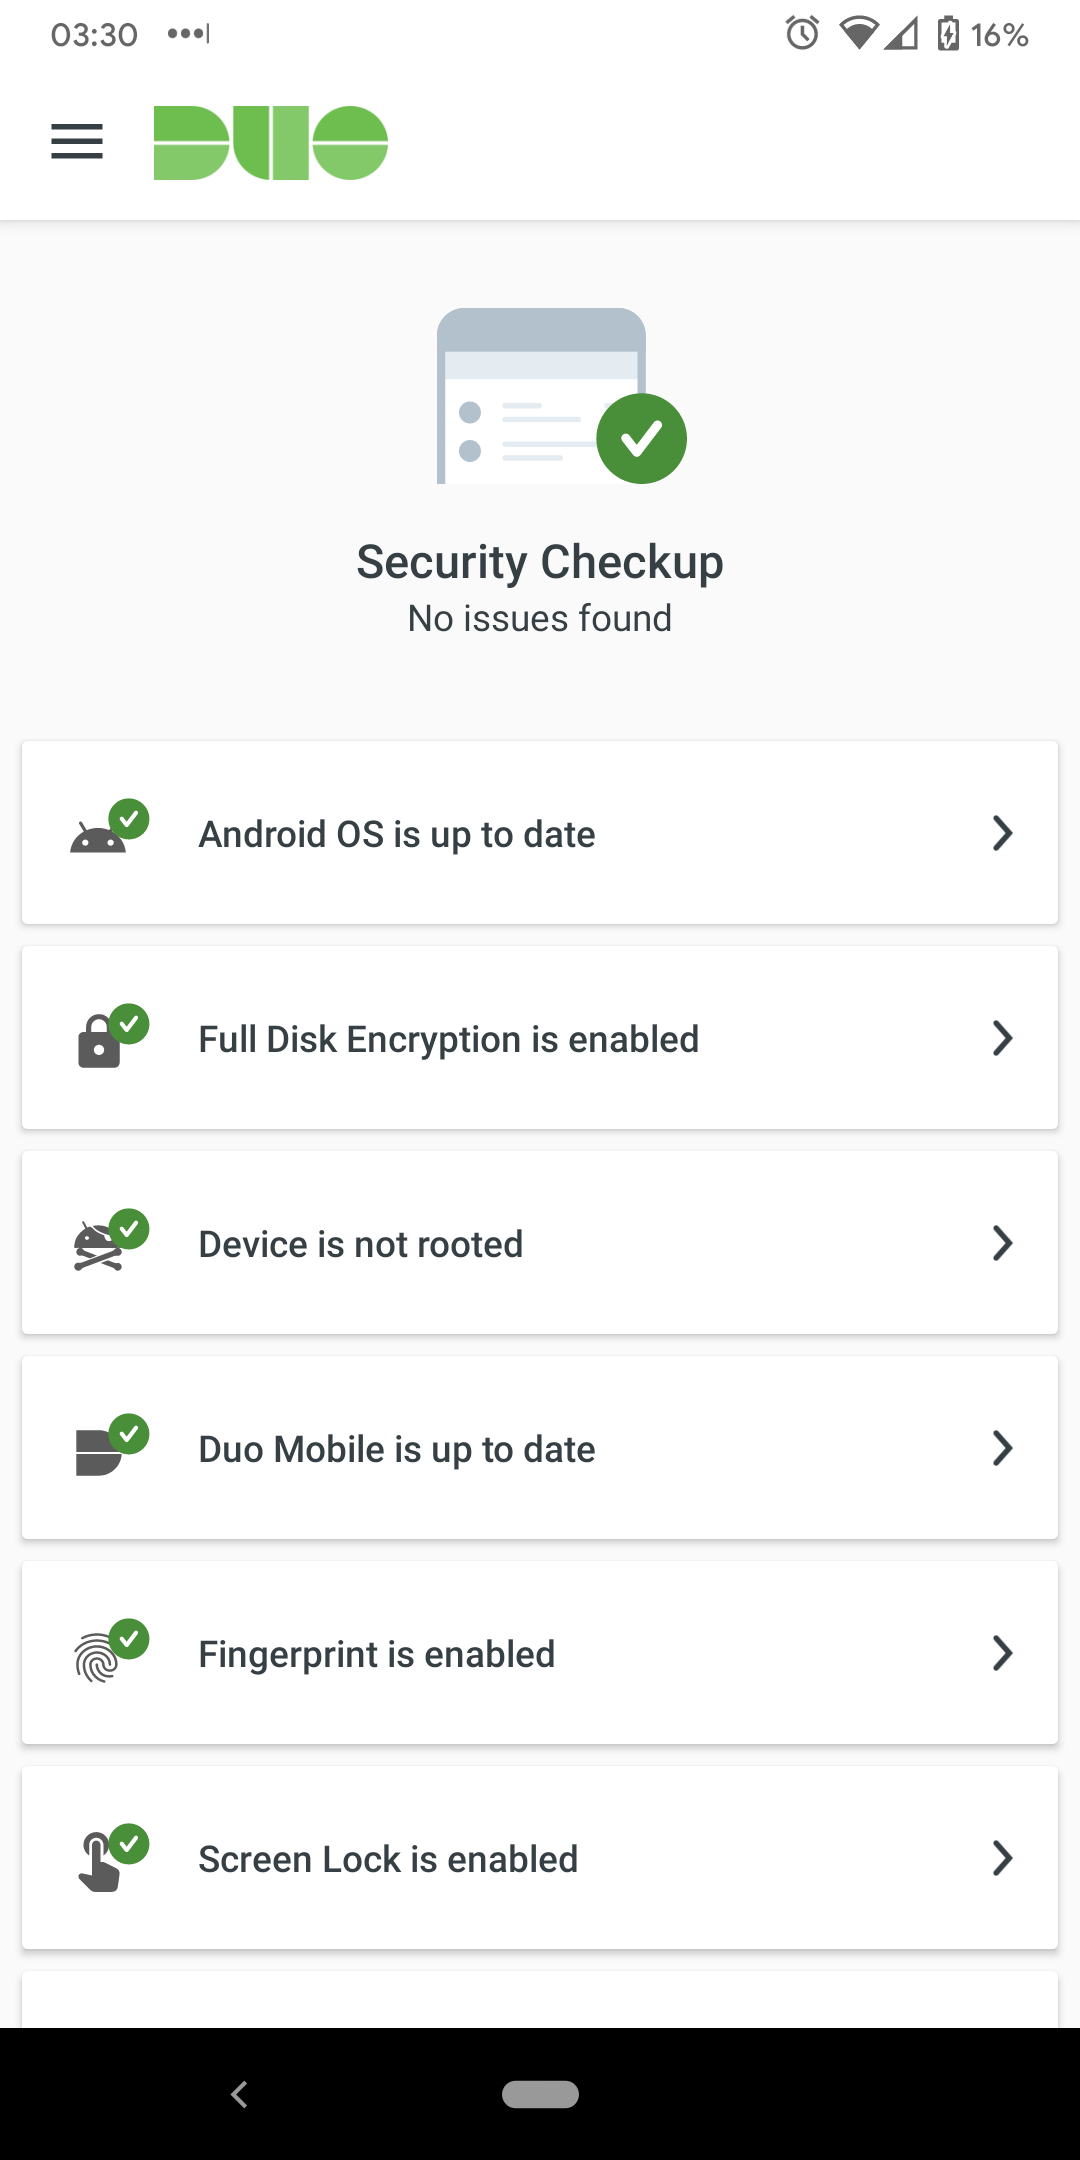 Duo Mobile Security Checkup - No Issues